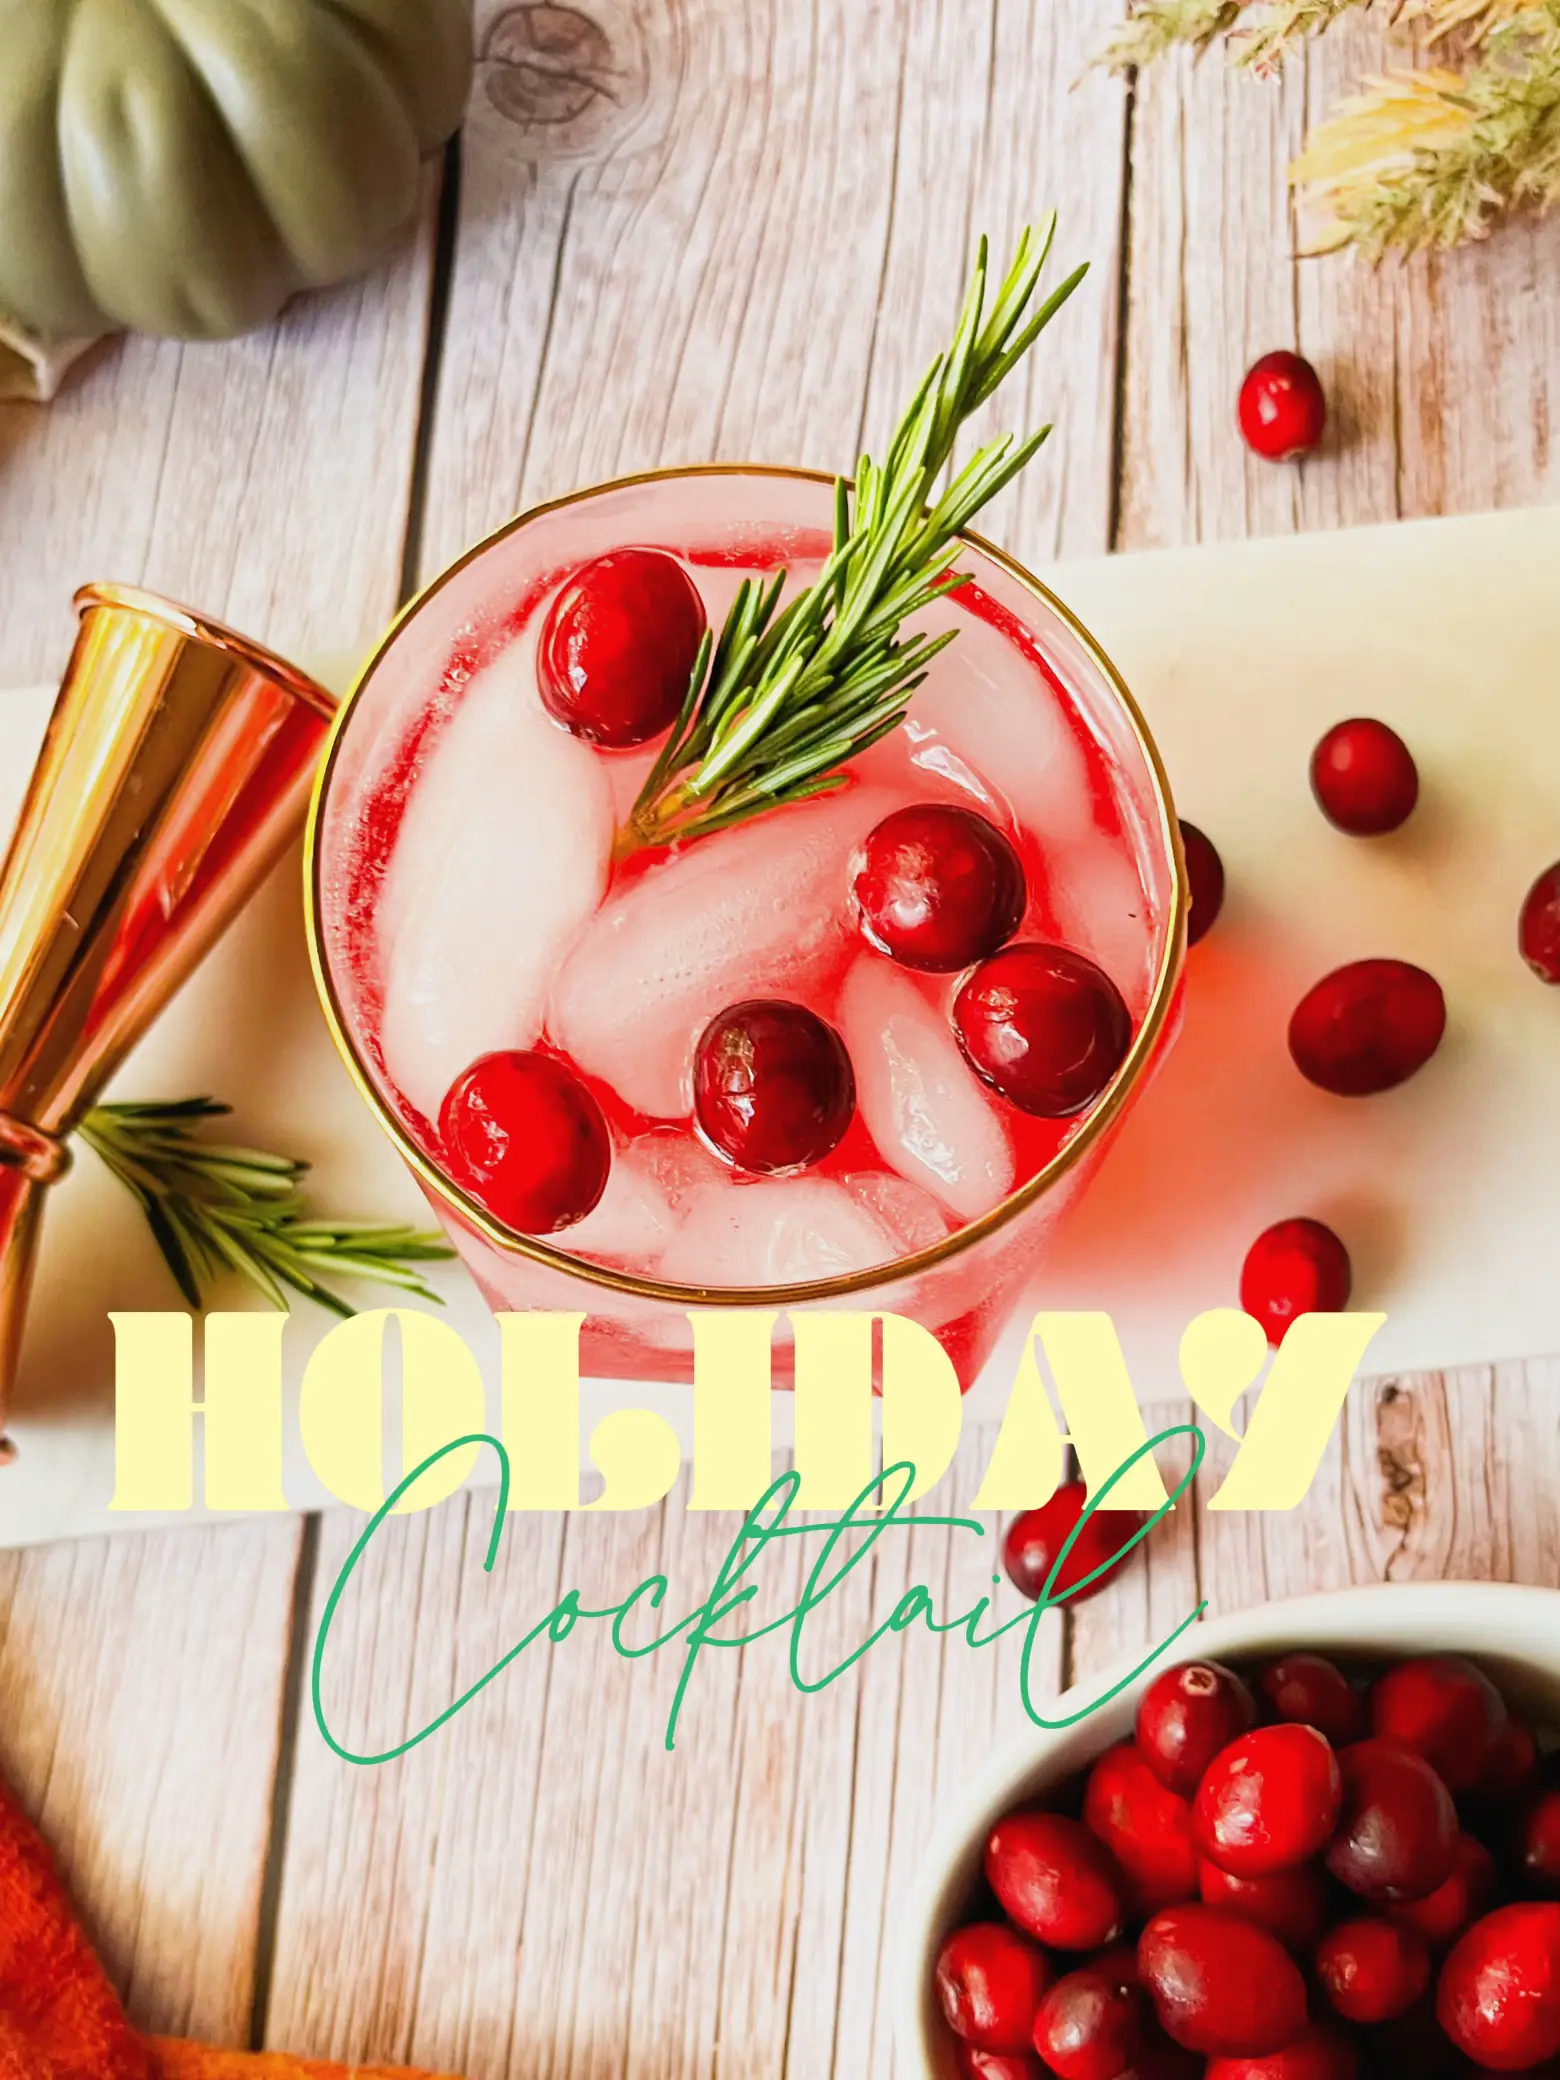 3 INGREDIENT Holiday Cocktail's images